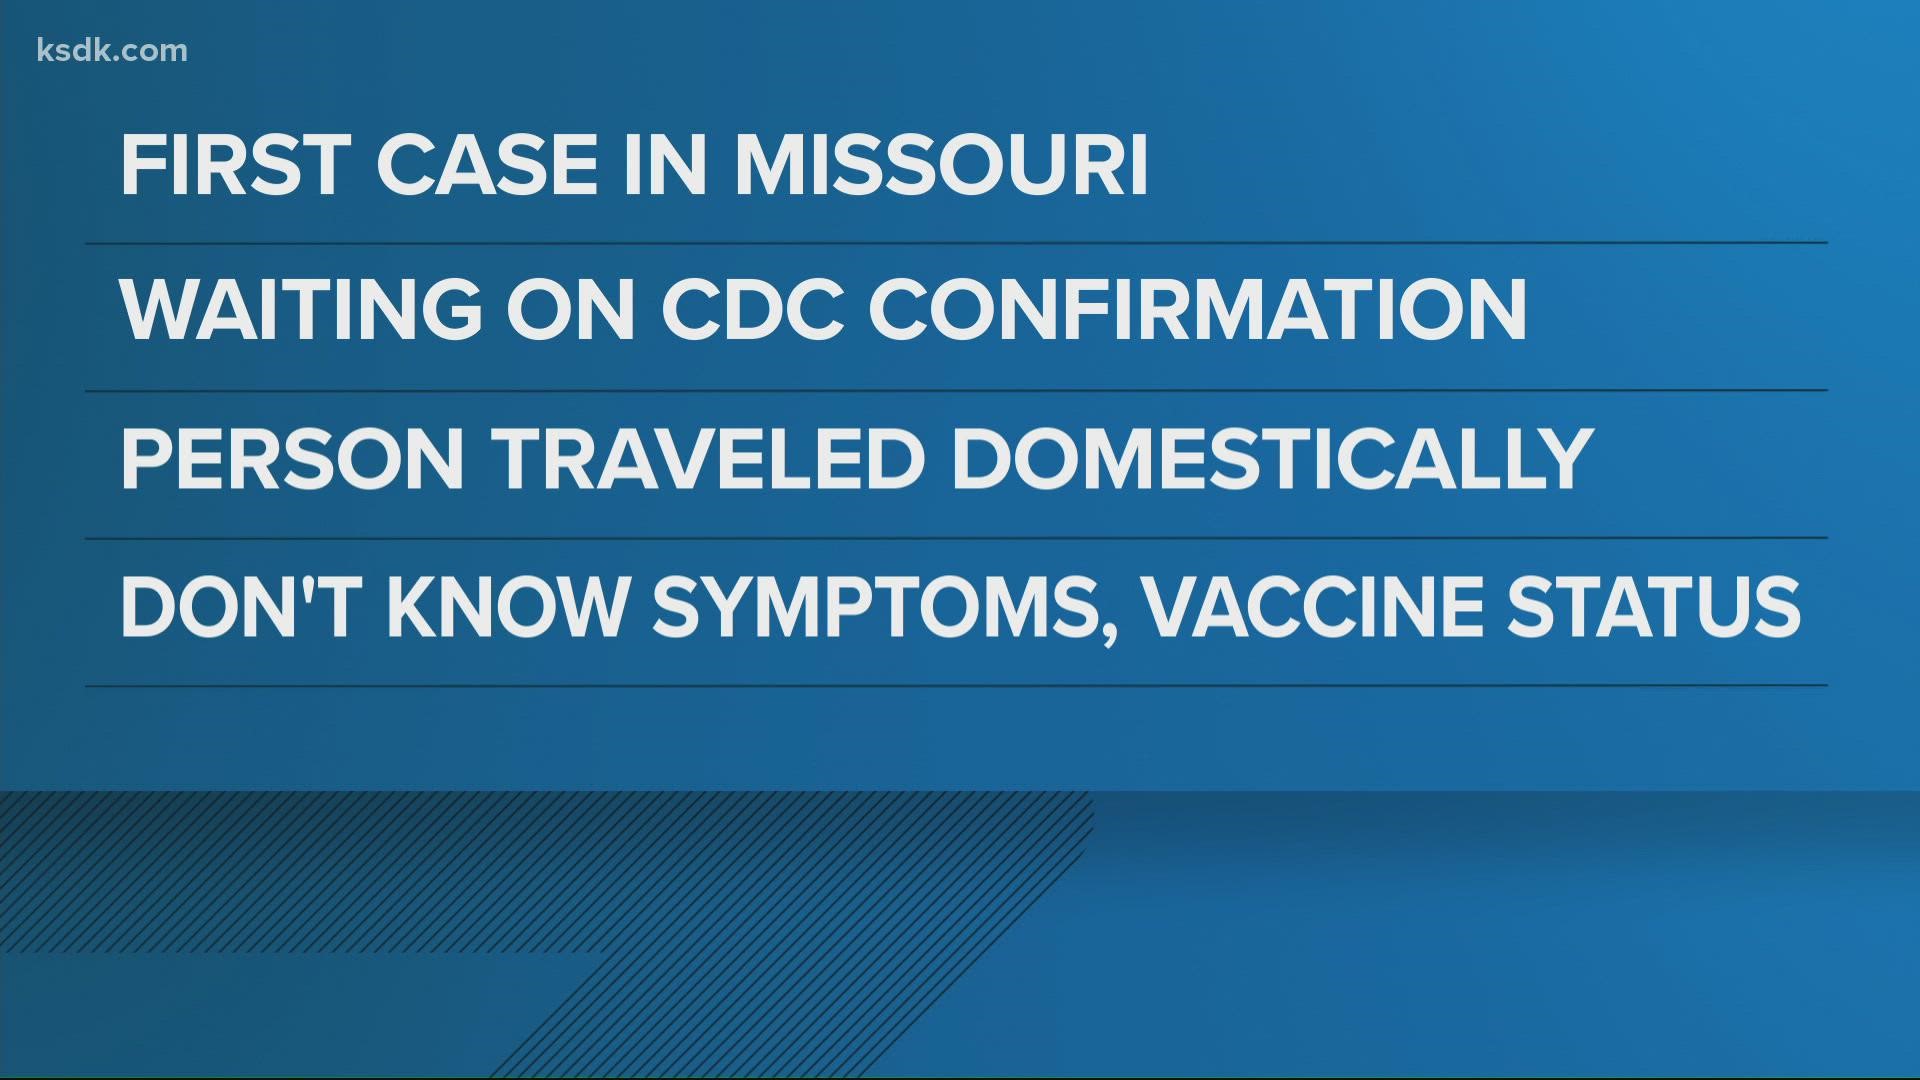 The omicron variant was detected in a presumed positive case of COVID-19 in a St. Louis City resident who had recently traveled domestically.